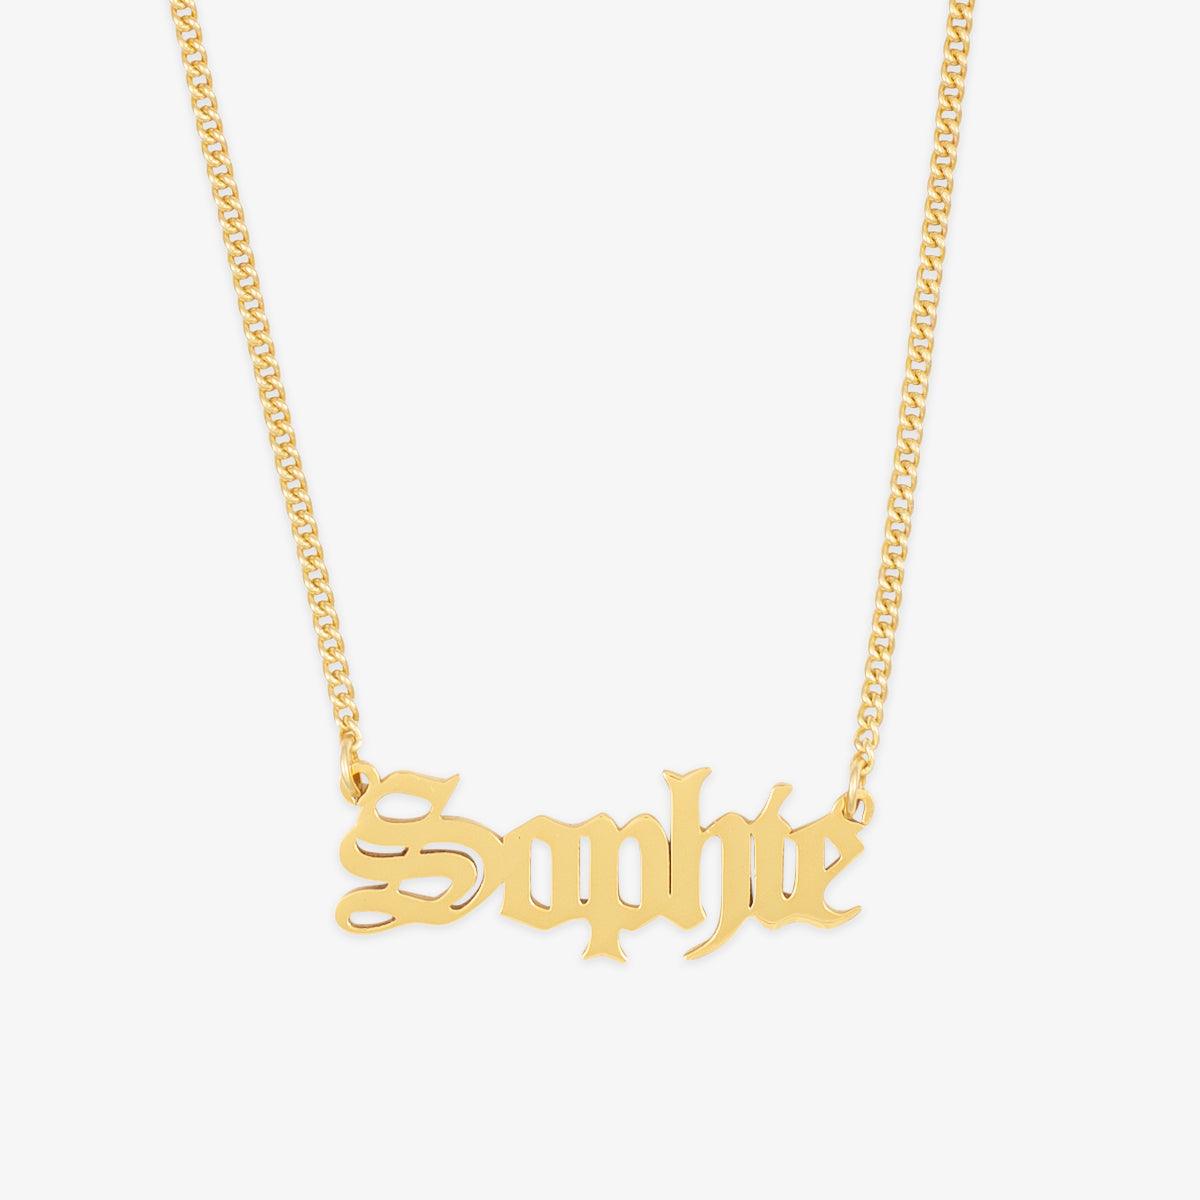 herzschmuck Gothic Elegance Personalized Name Necklace